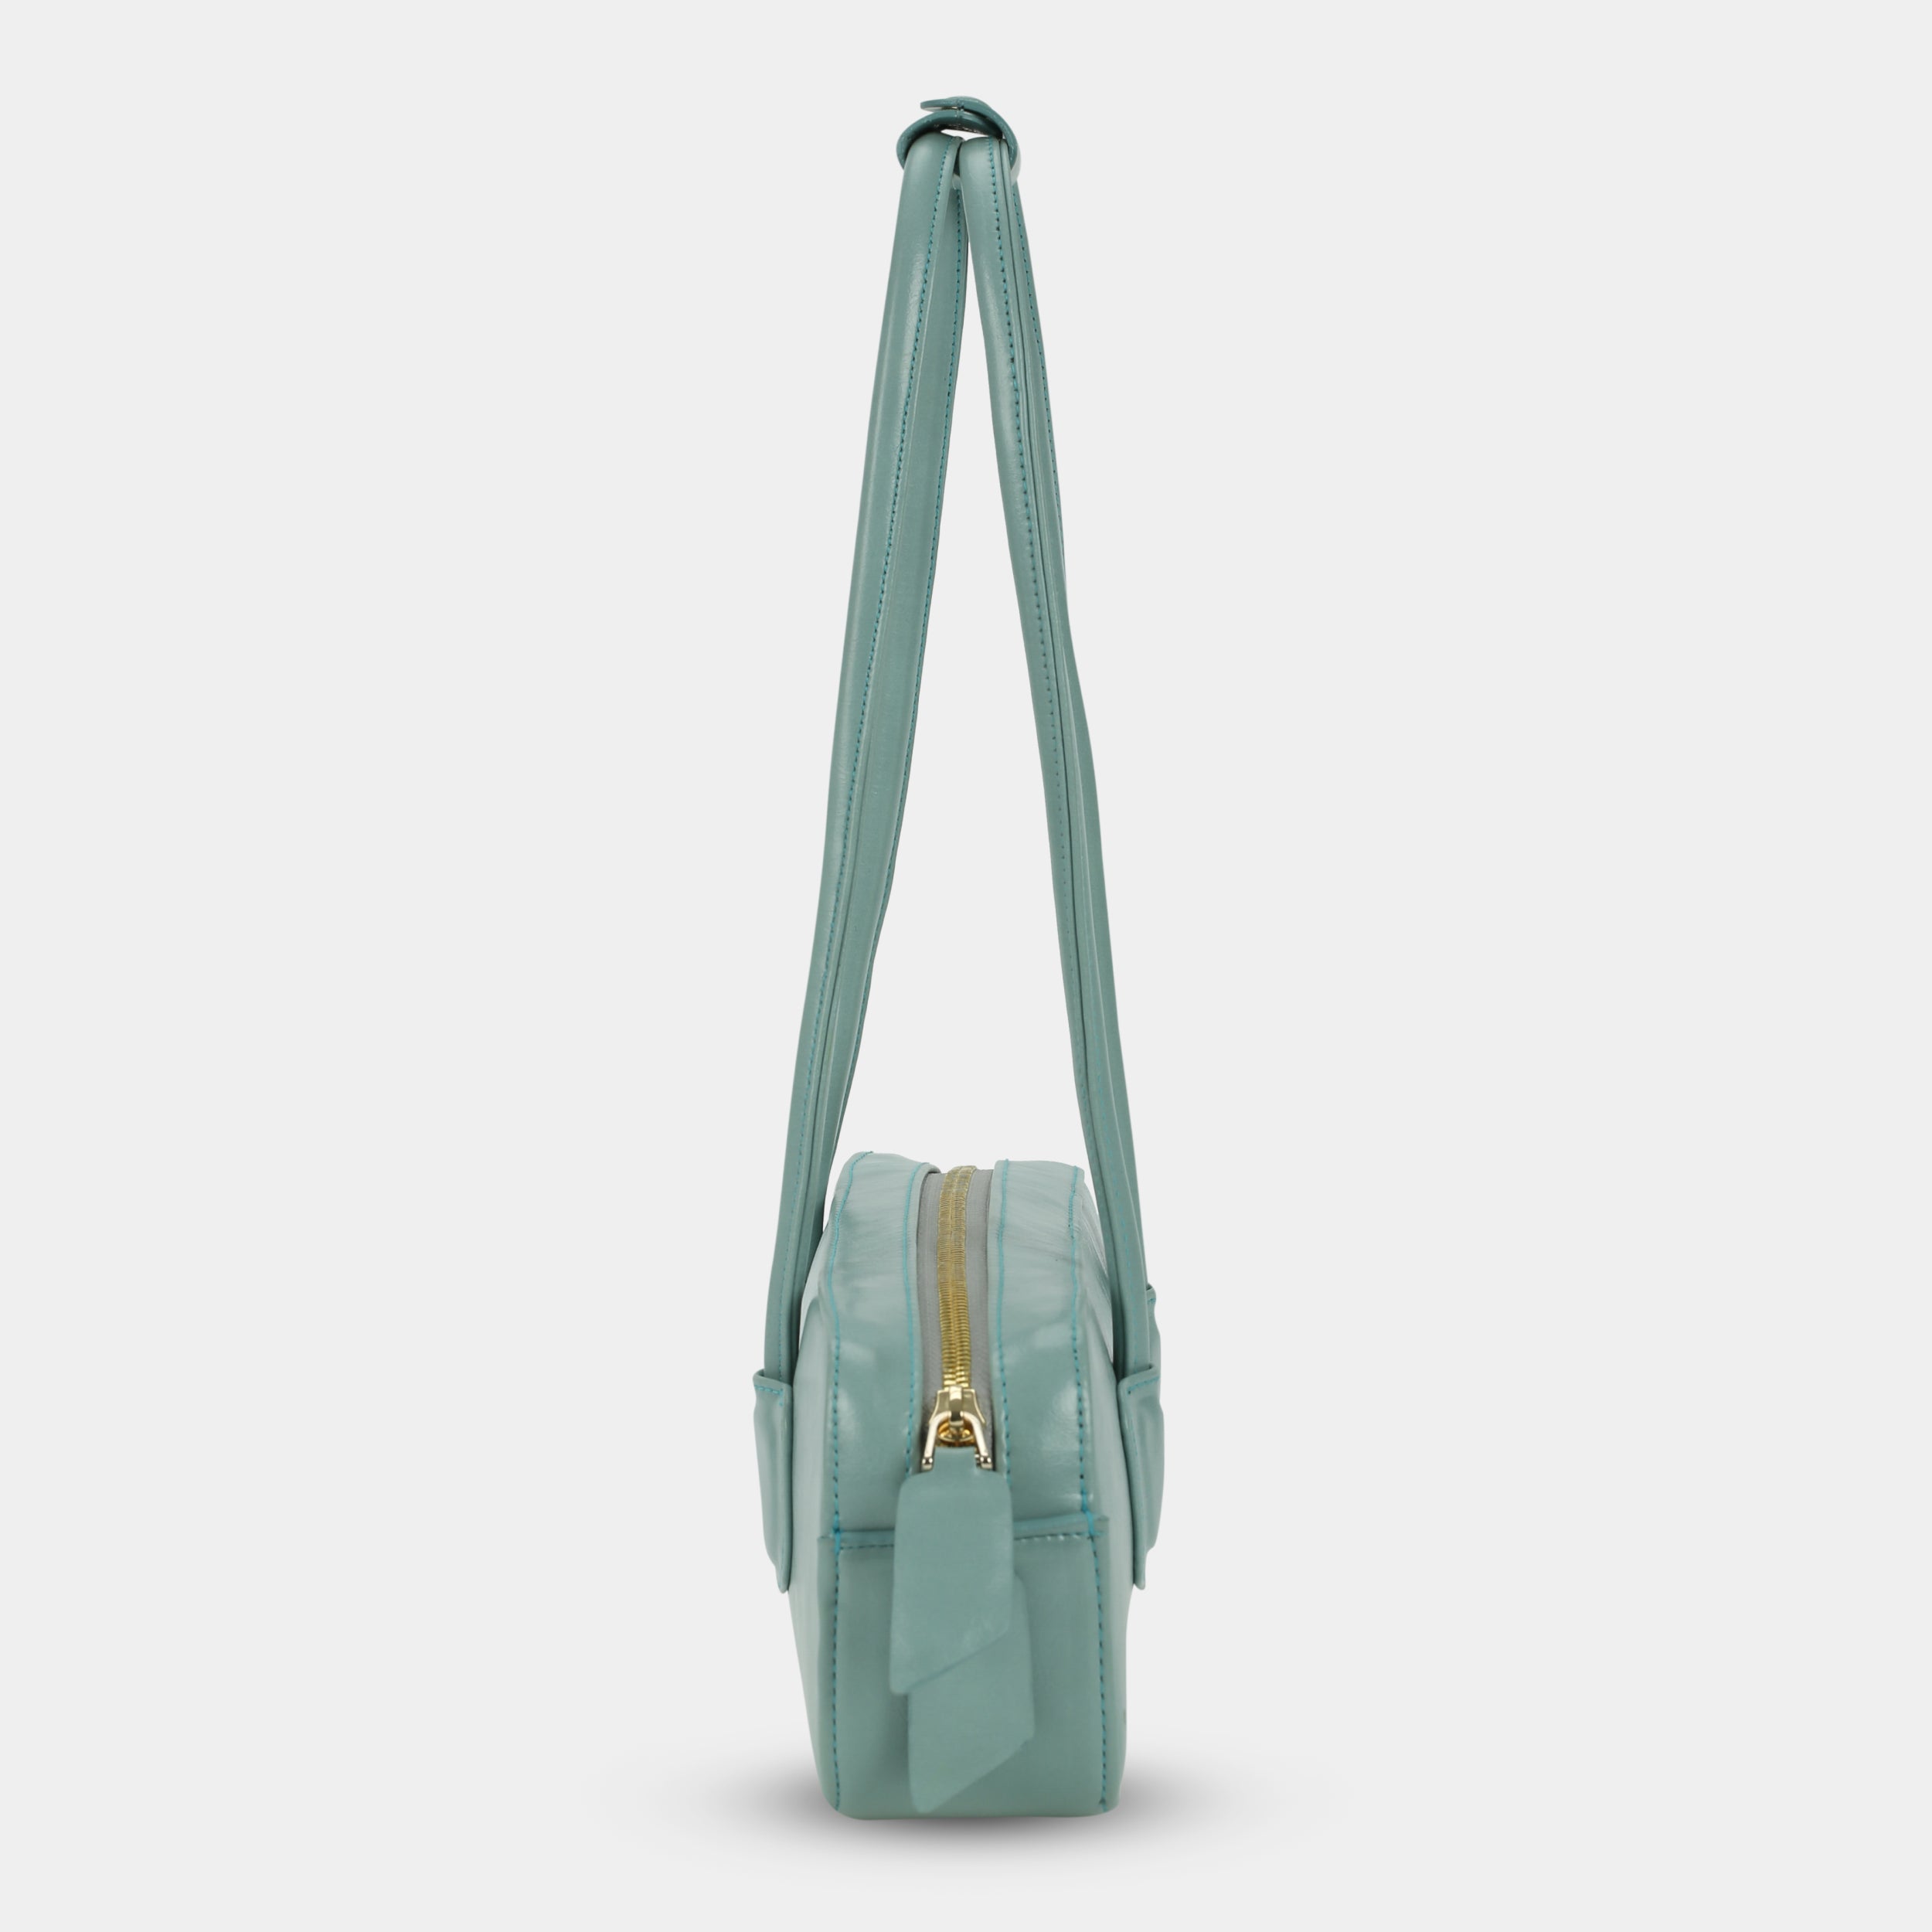 BREAKING bag in pastel turquoise color